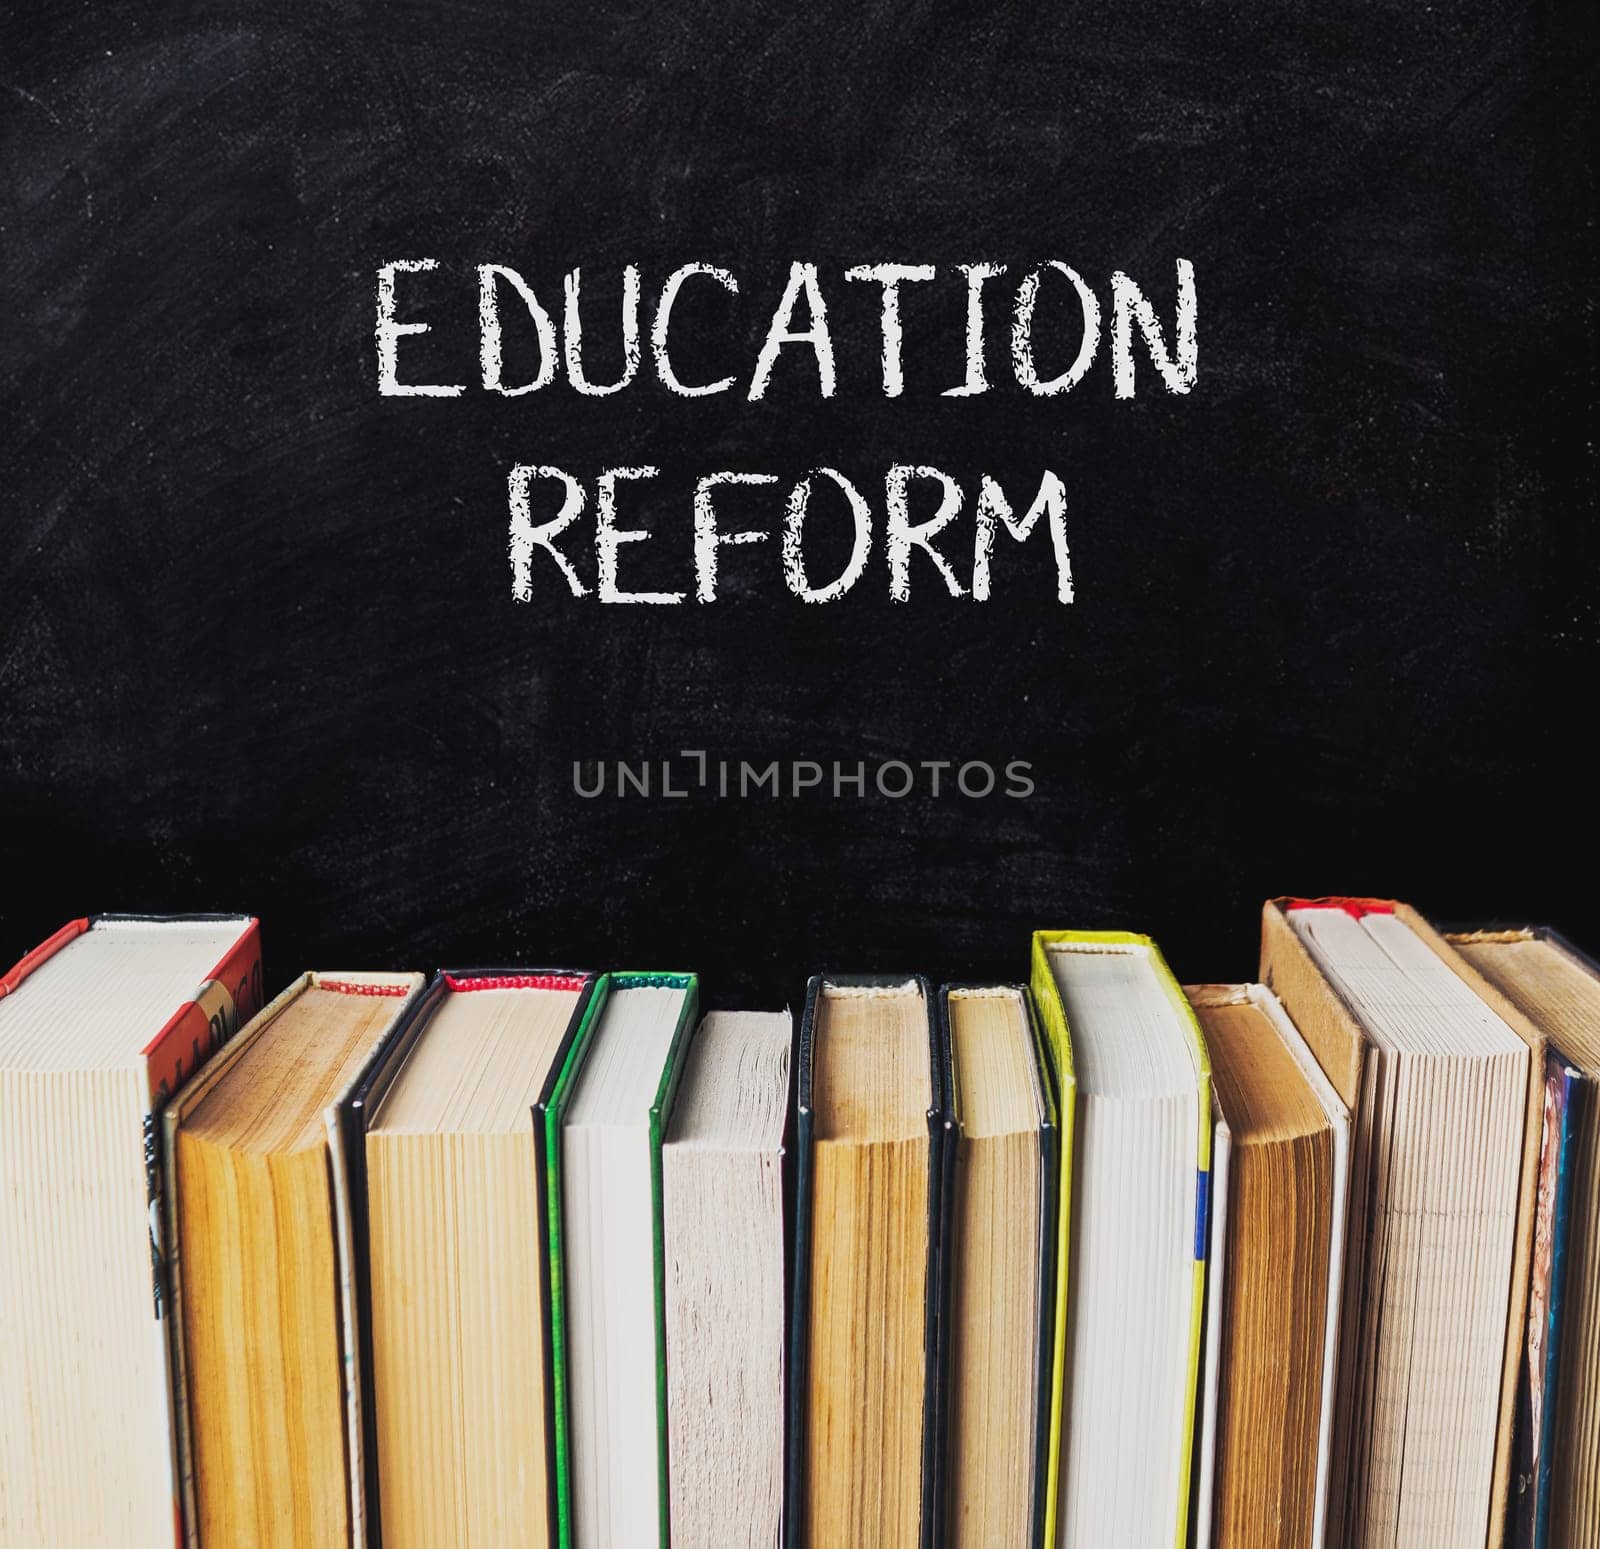 A chalkboard with the words Education Reform written on it. The chalkboard is covered with books, some of which are open